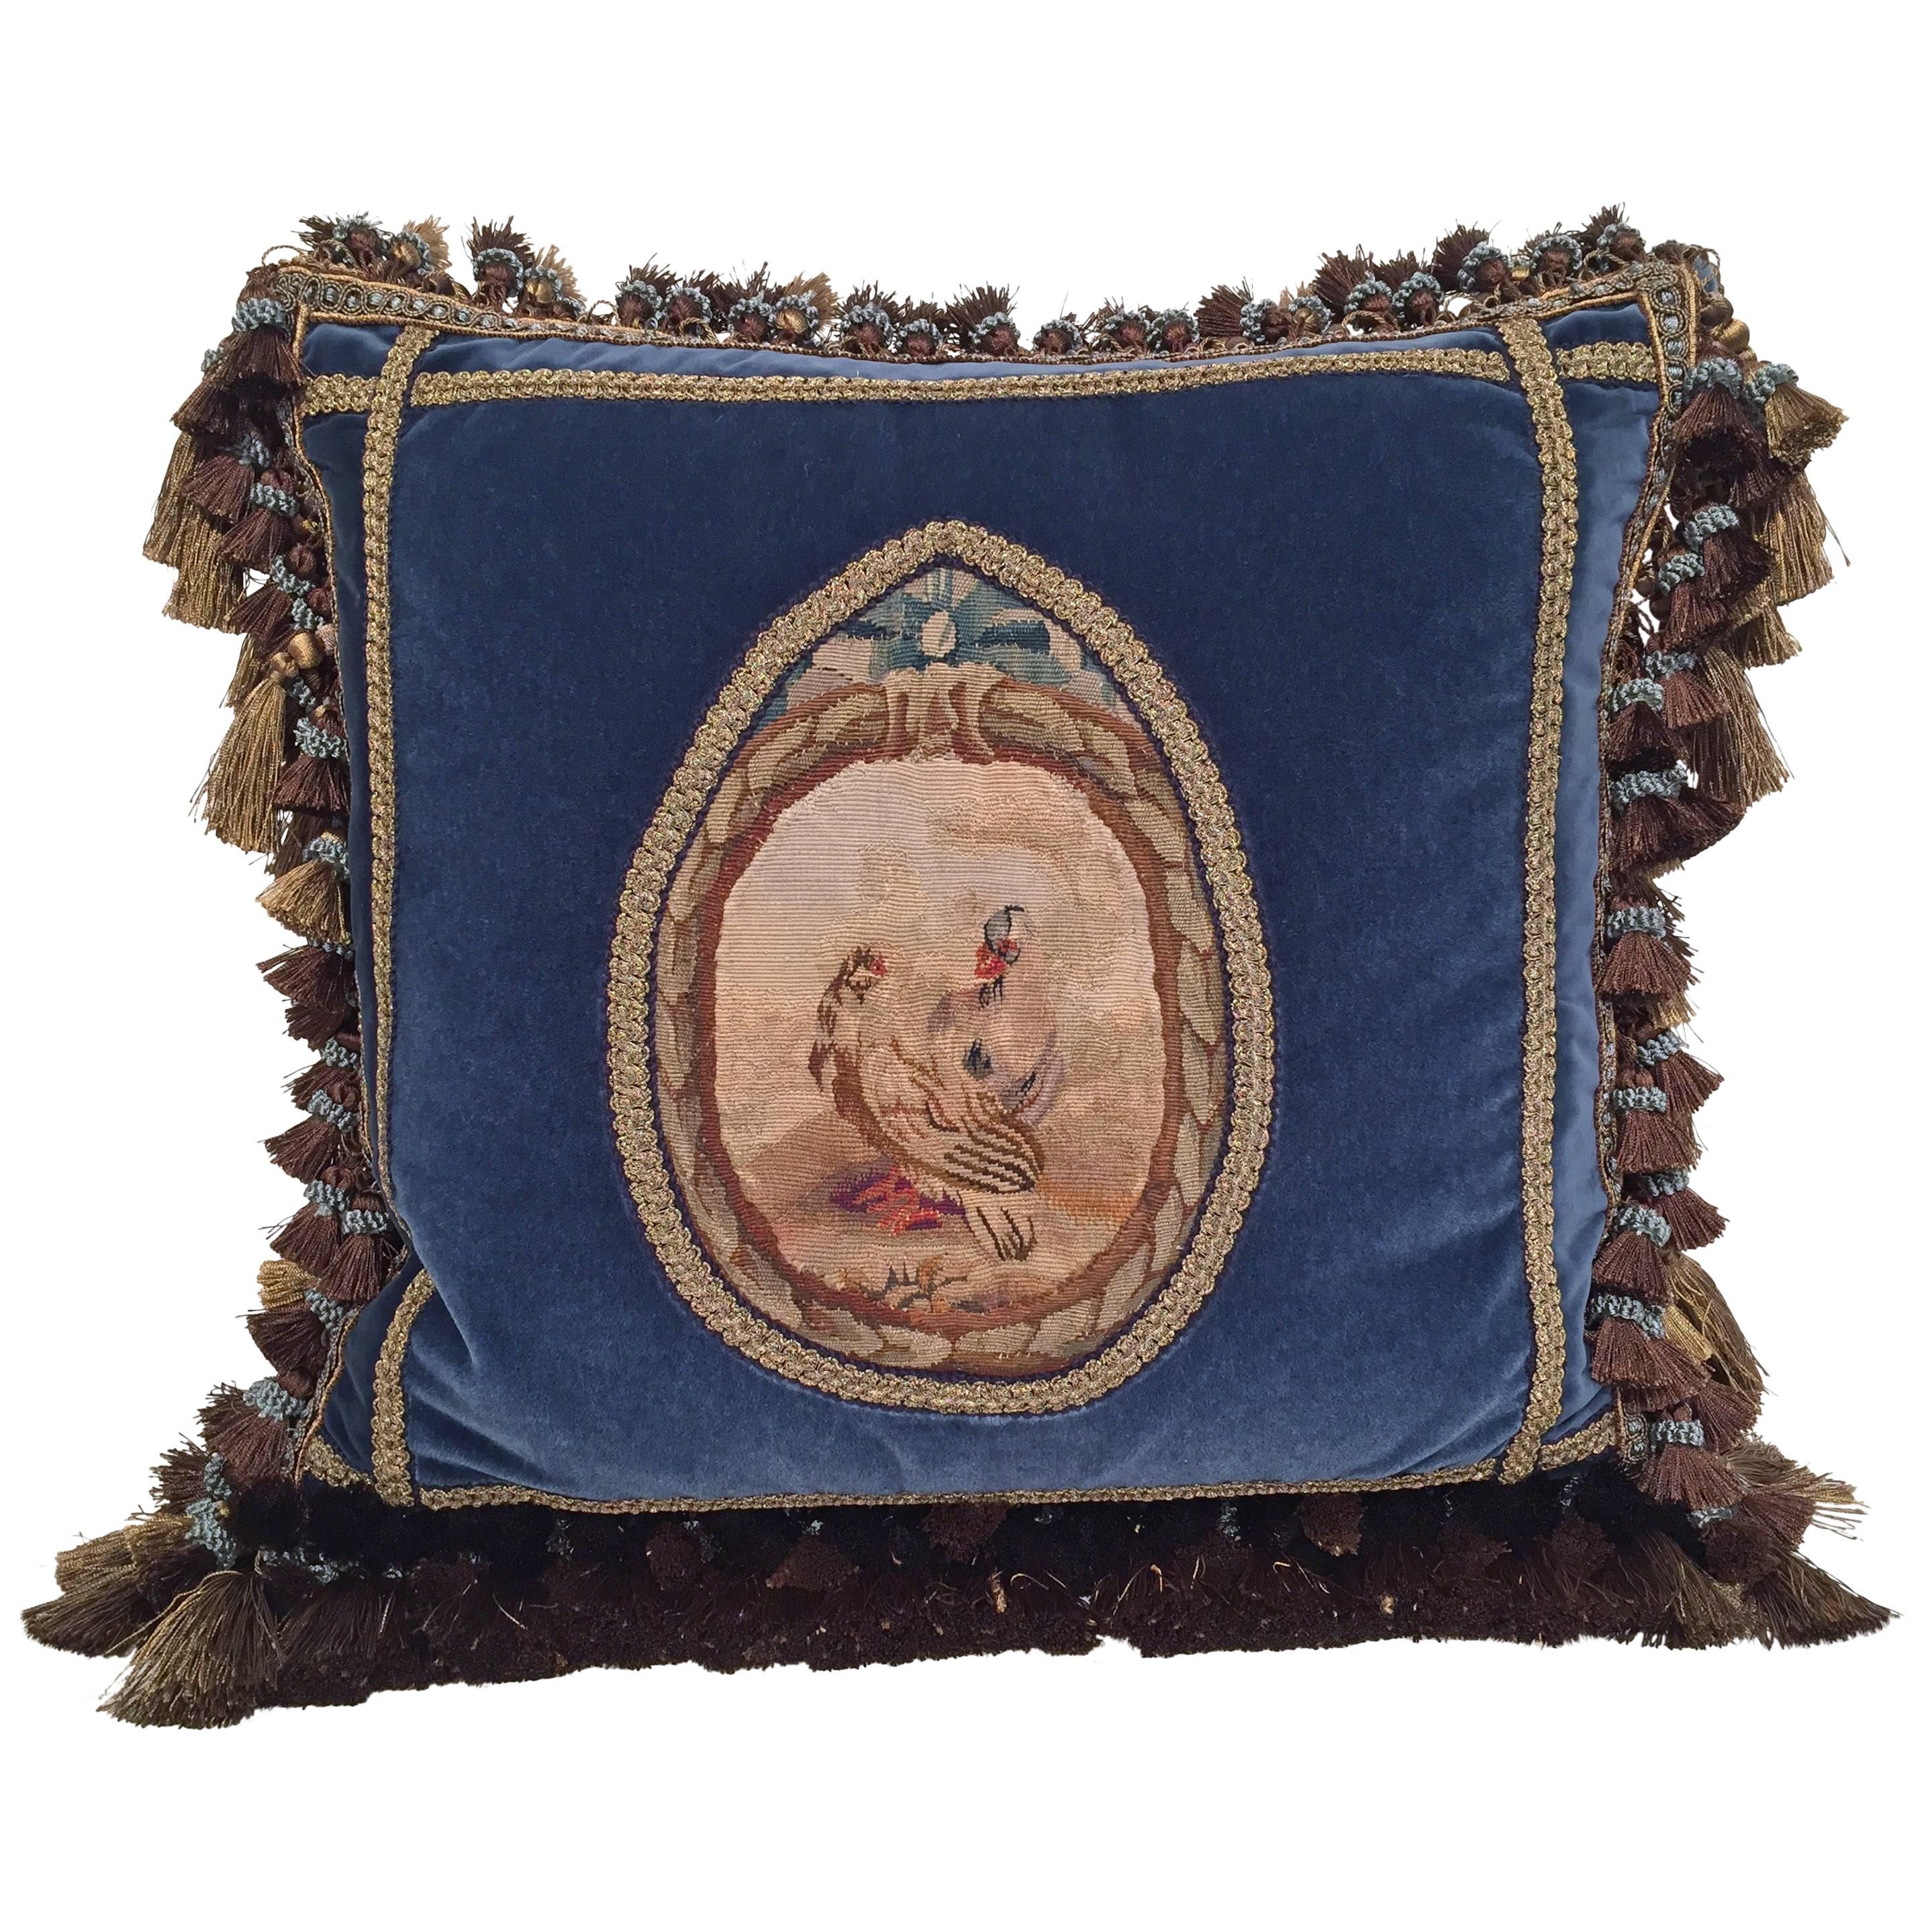 Handmade French Pillow with 18th Century Aubusson Tapestry, Trims and Tassels